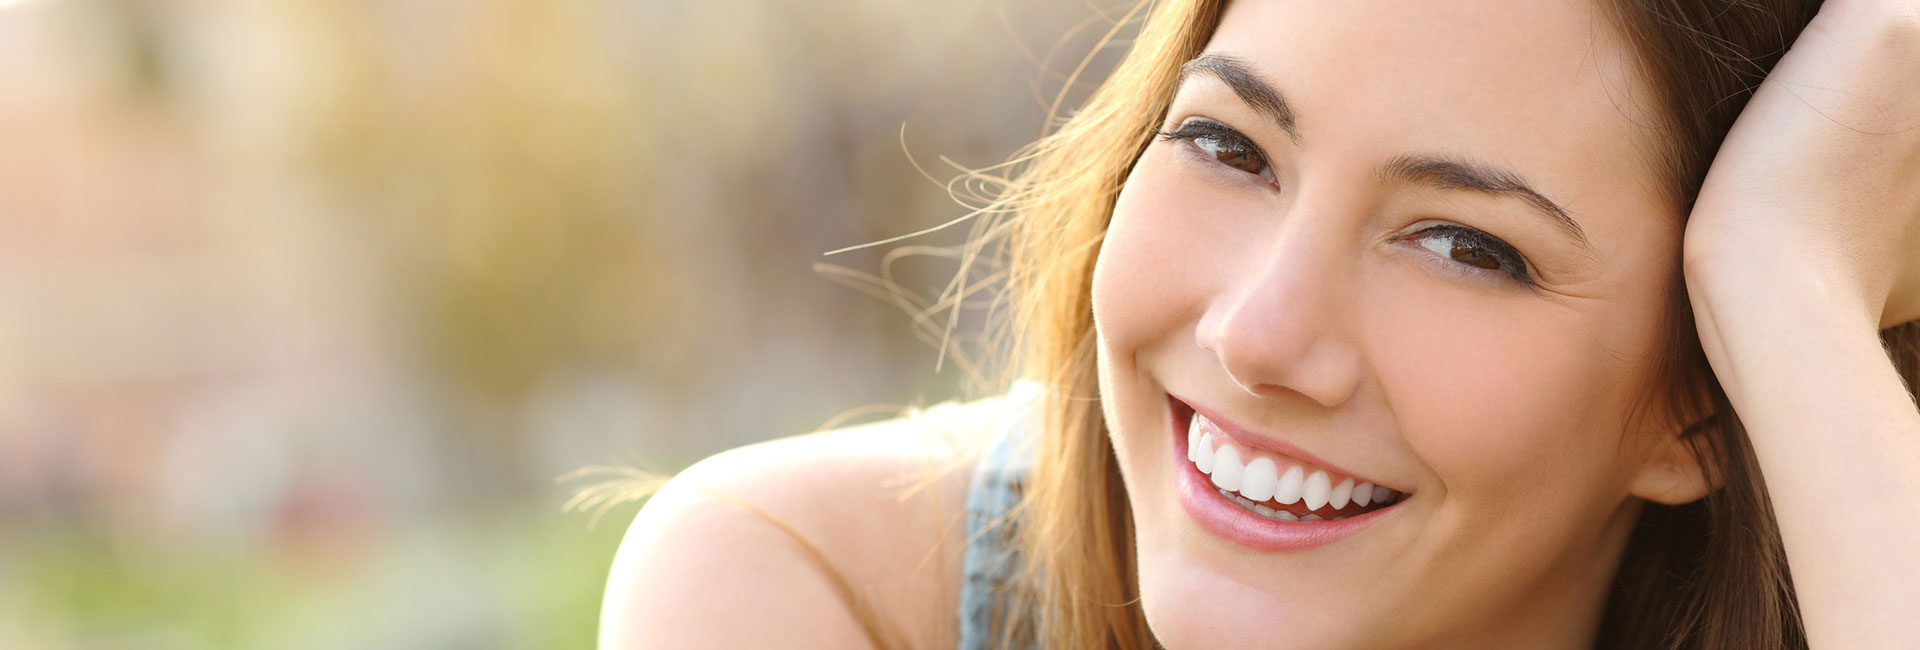 Girl smiling with perfect smile and white teeth